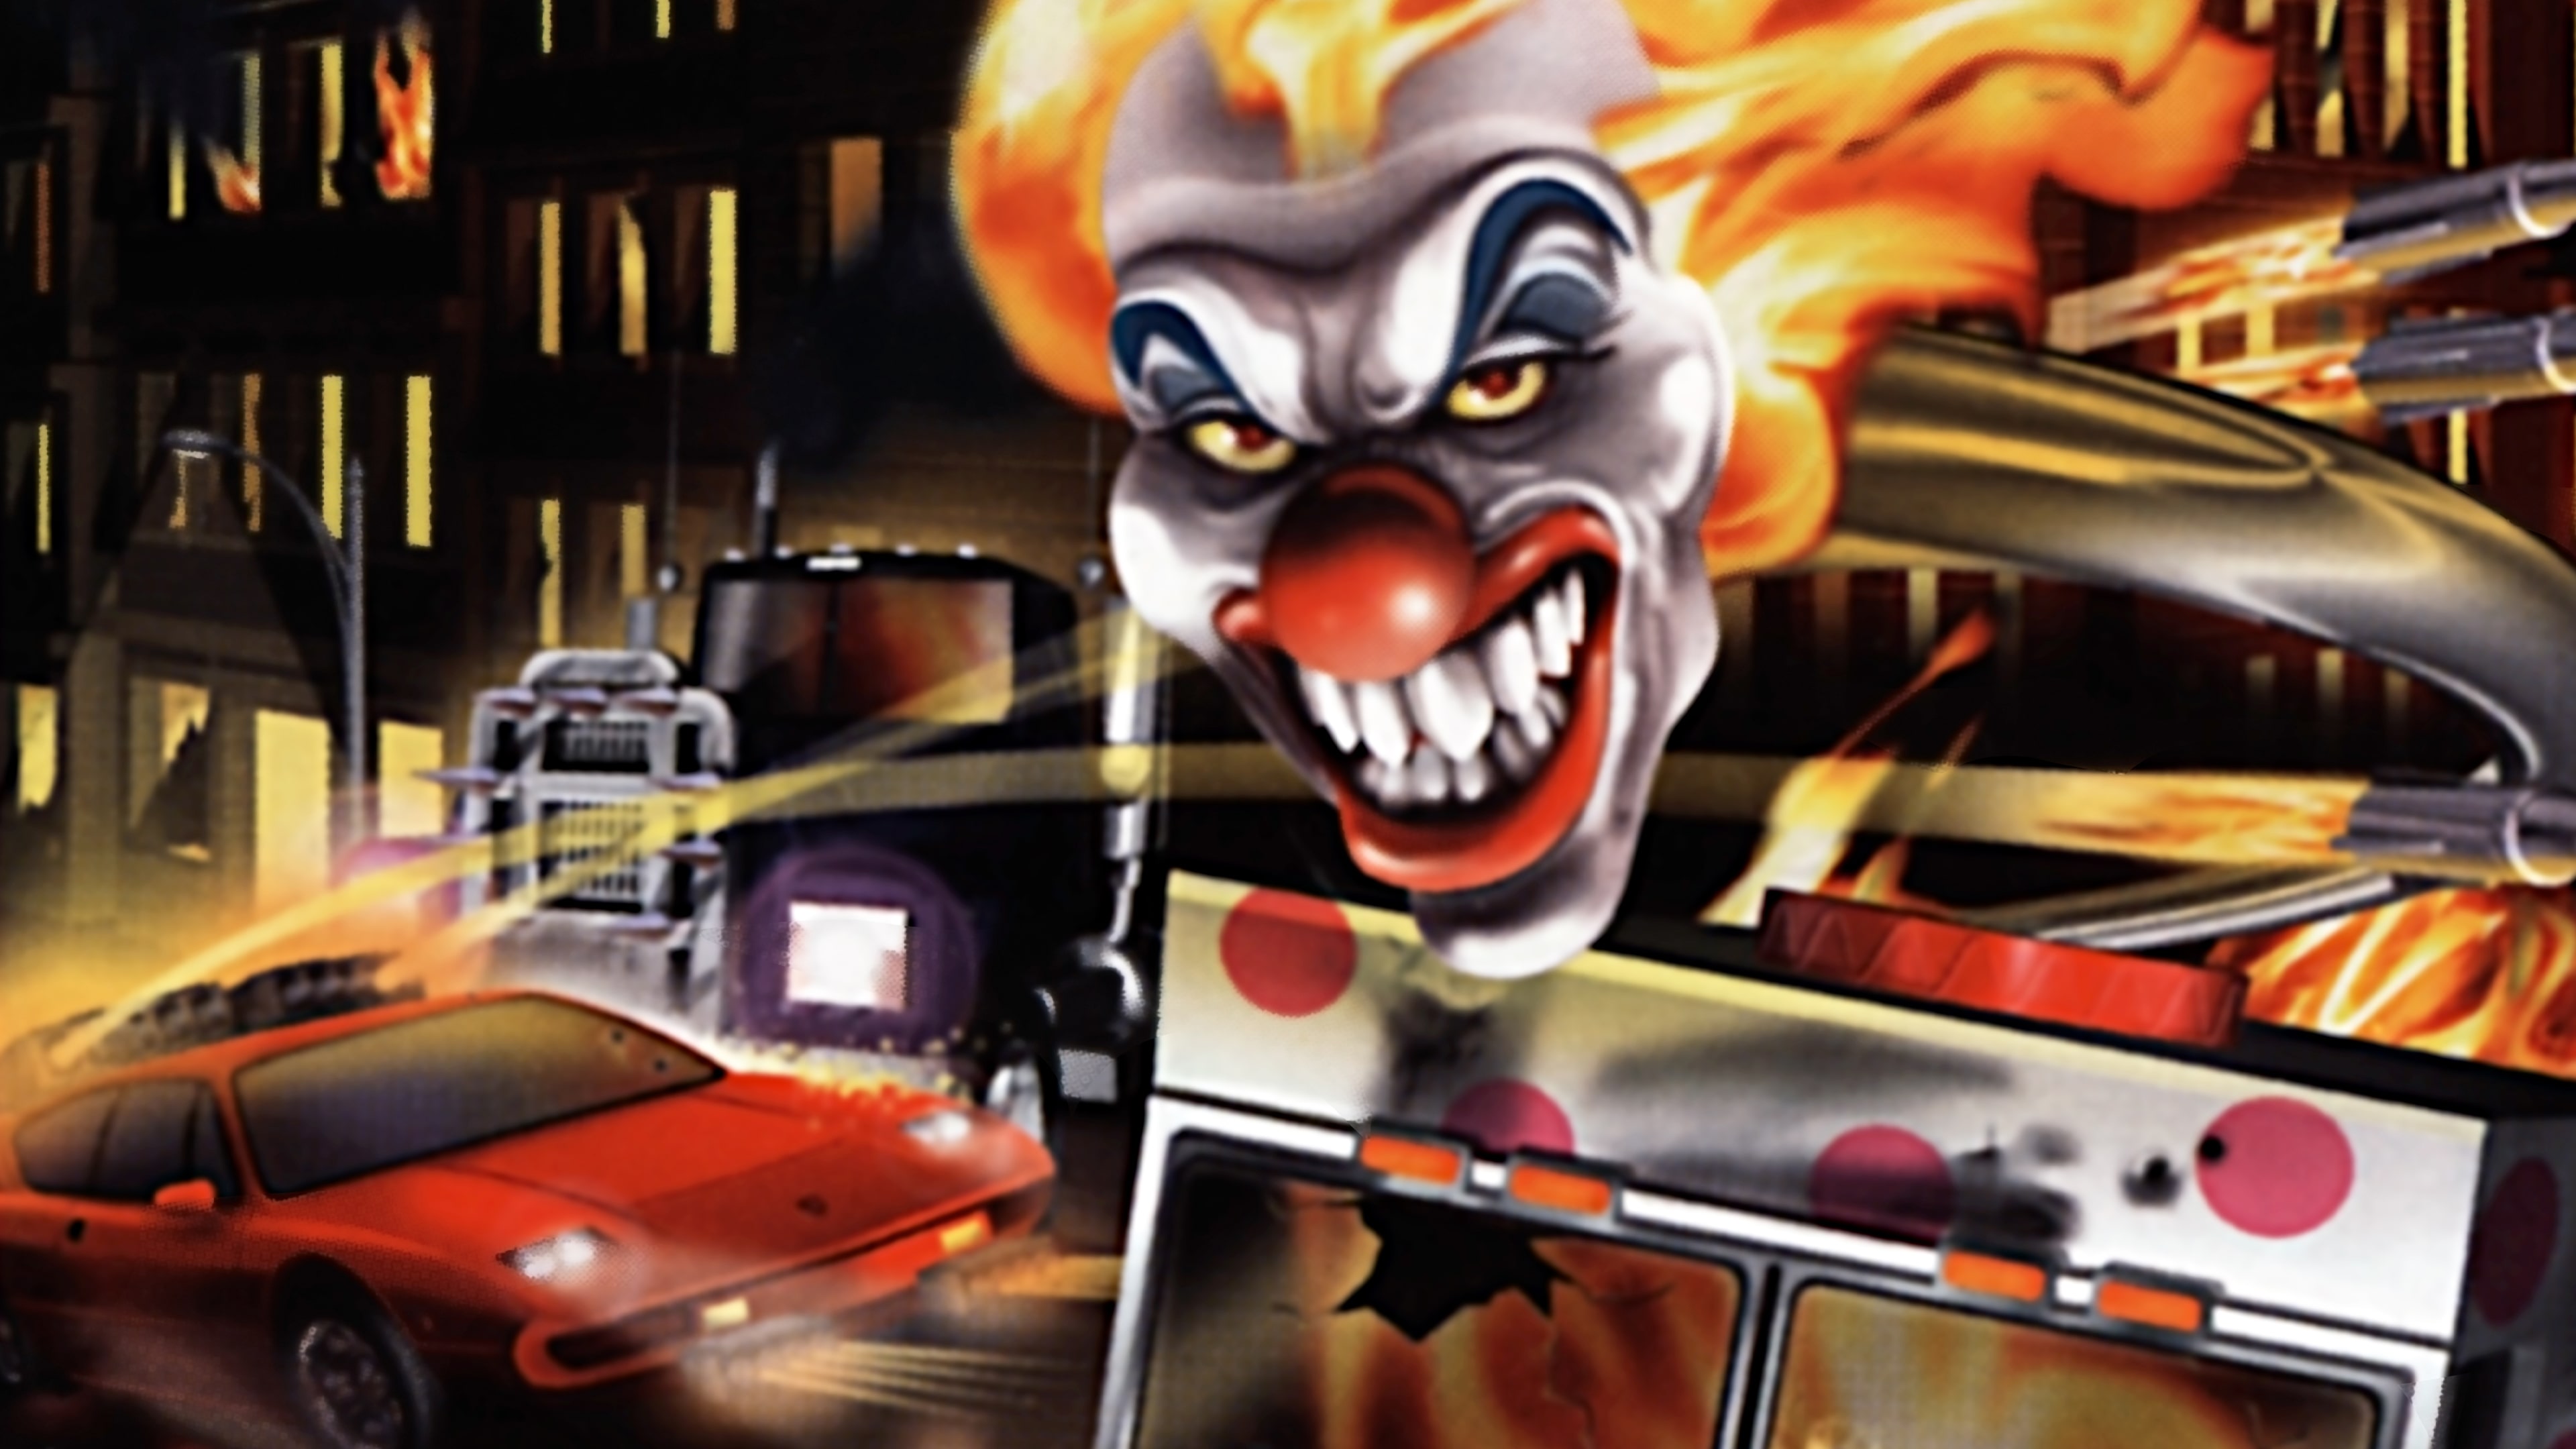  Made for Game Custom Vehicle in Twisted Metal 4